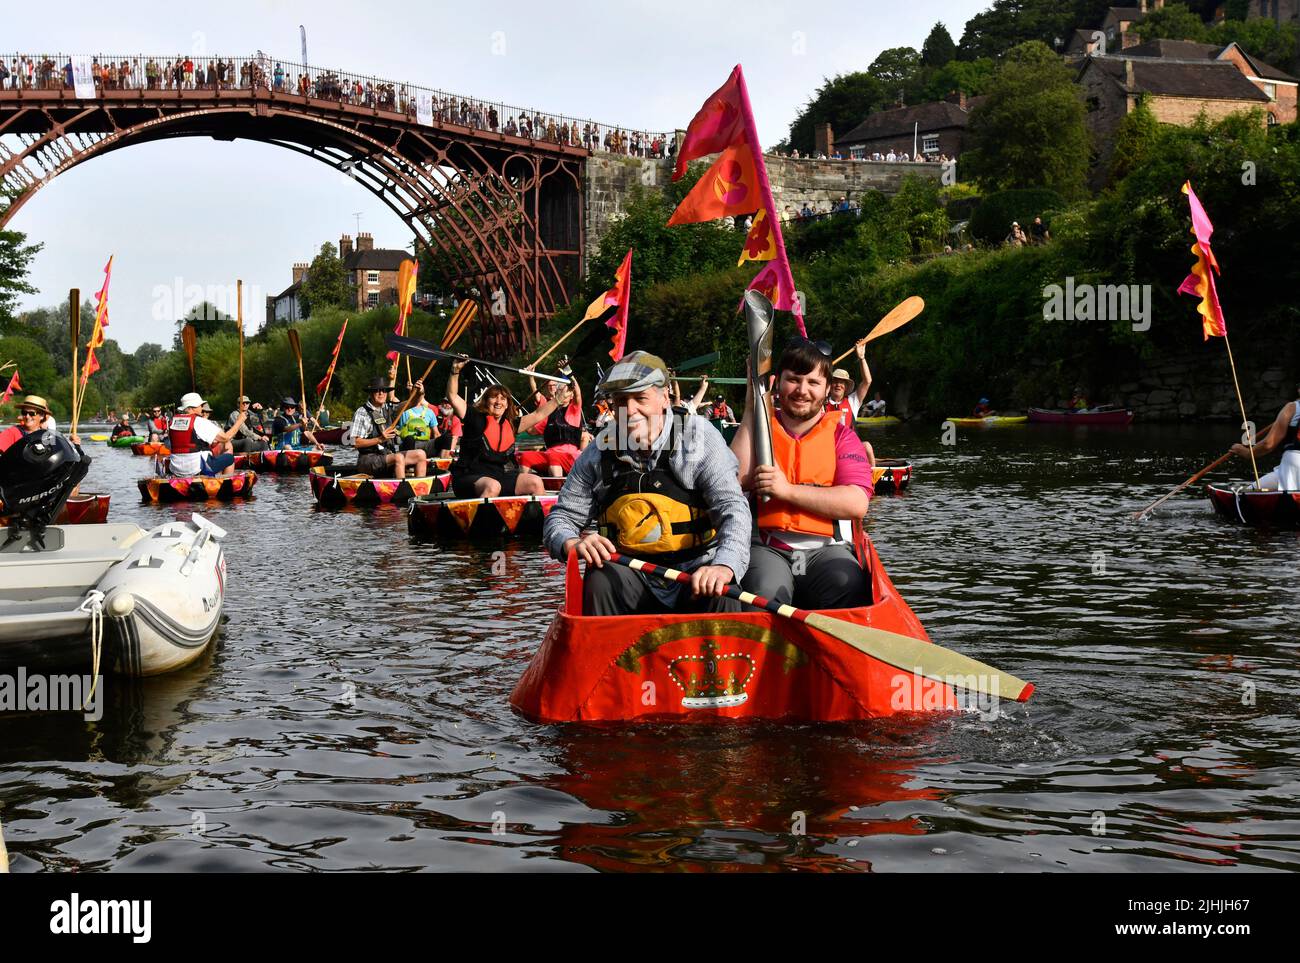 Ironbridge, Shropshire, Uk. July 19th 2022. Queen's Baton Relay. The Commonwealth Games Queen's Baton Relay passing through Ironbridge in Shropshire. The baton travelled by coracle on the River Severn escorted by a flotilla of coracles from the Ironbridge Coracle Society. Credit: Dave Bagnall /Alamy Live News Stock Photo